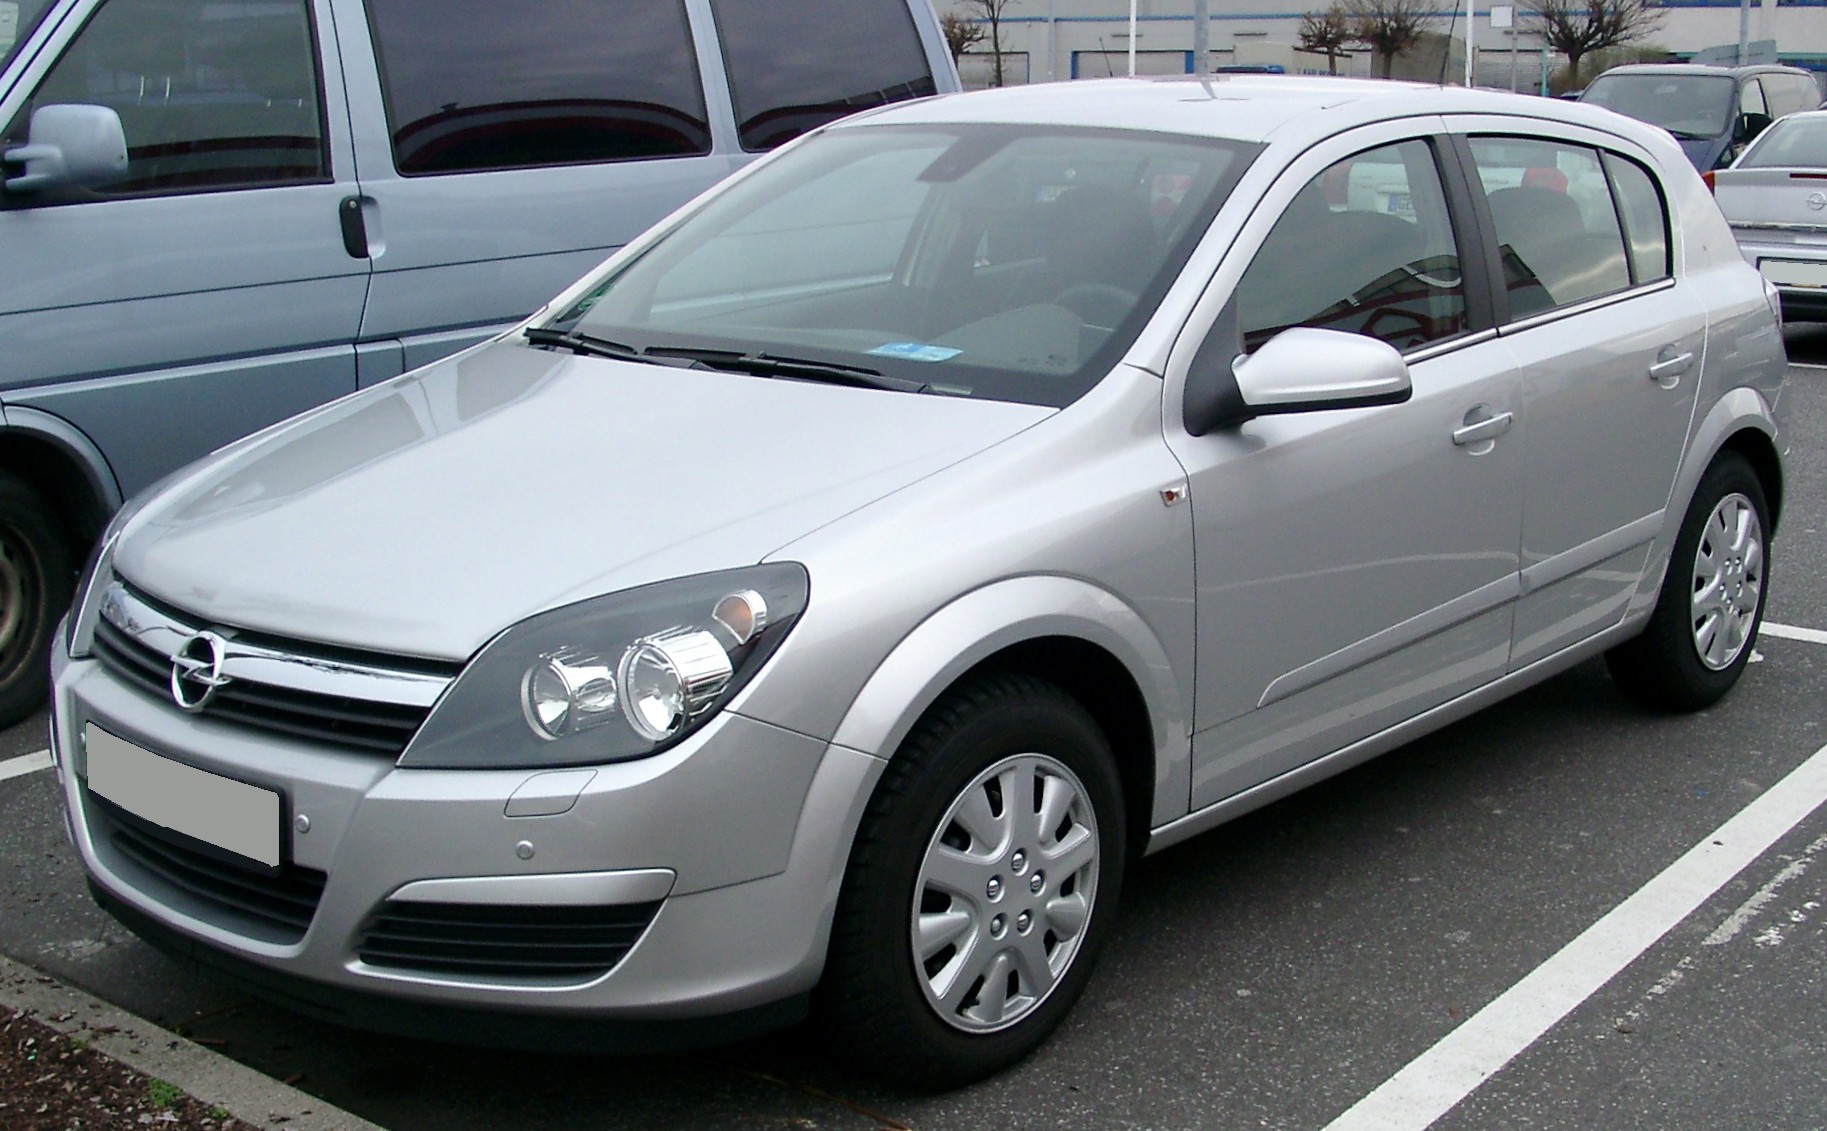 File:Opel Astra front 20080306.jpg - Wikimedia Commons